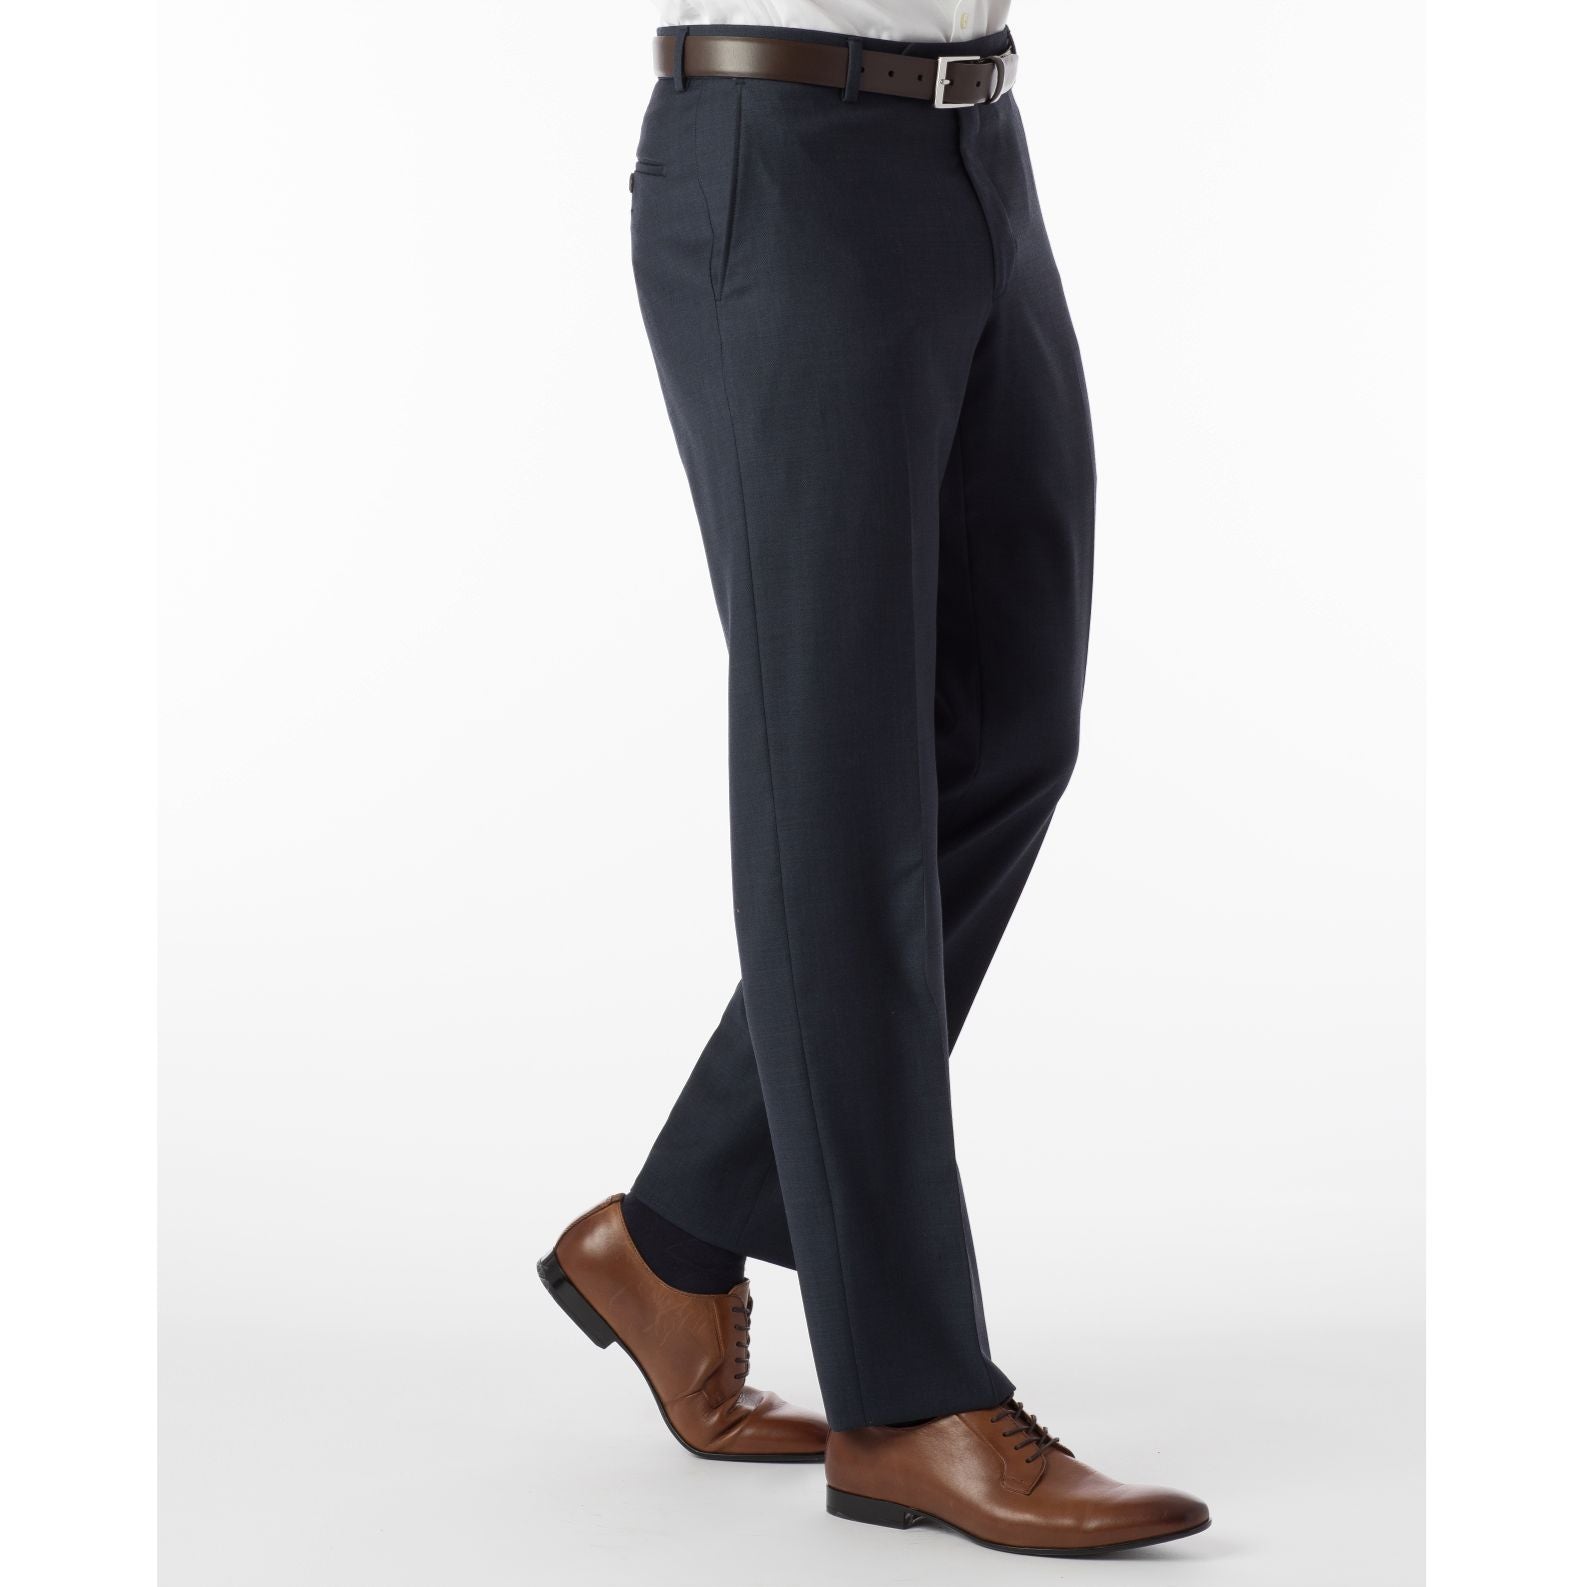 Sharkskin Super 120s Worsted Wool Comfort-EZE Trouser in Navy (Flat Front Models) by Ballin